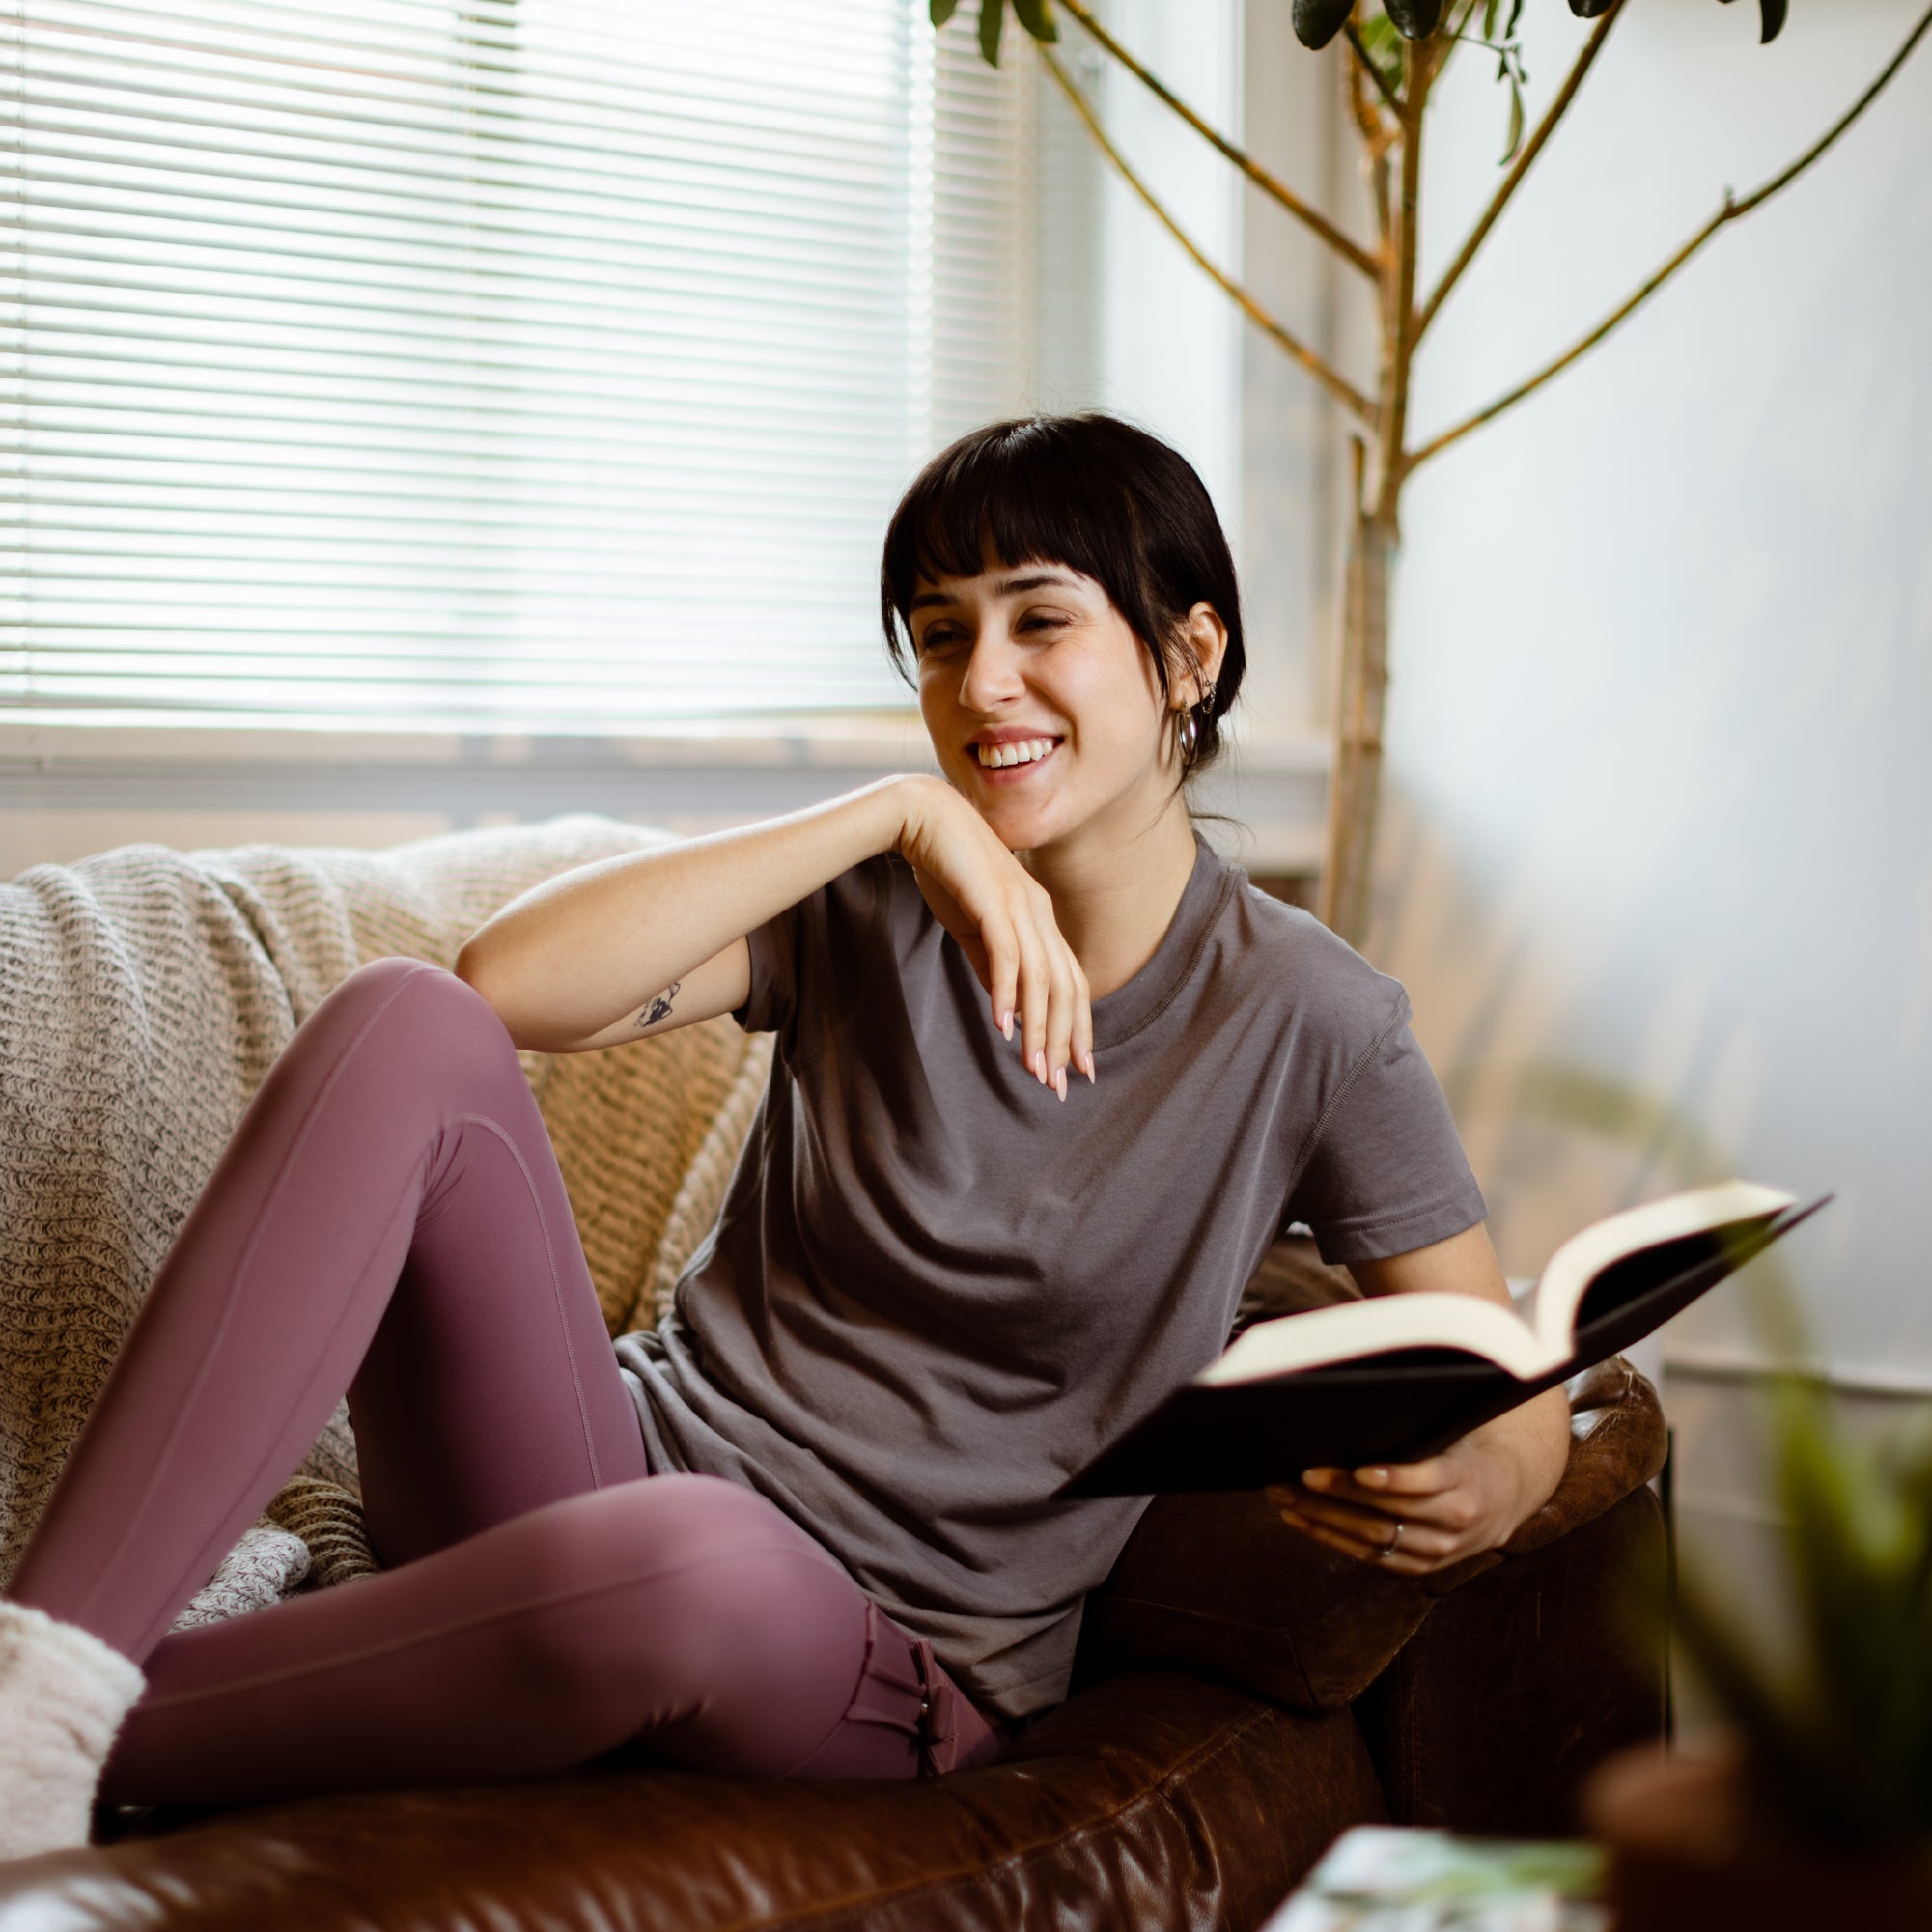 Sophia (A woman with long black hair) wears the No Limbits Adaptive Women's Charcoal Sensory Tee. She lays on a couch, holding a book.